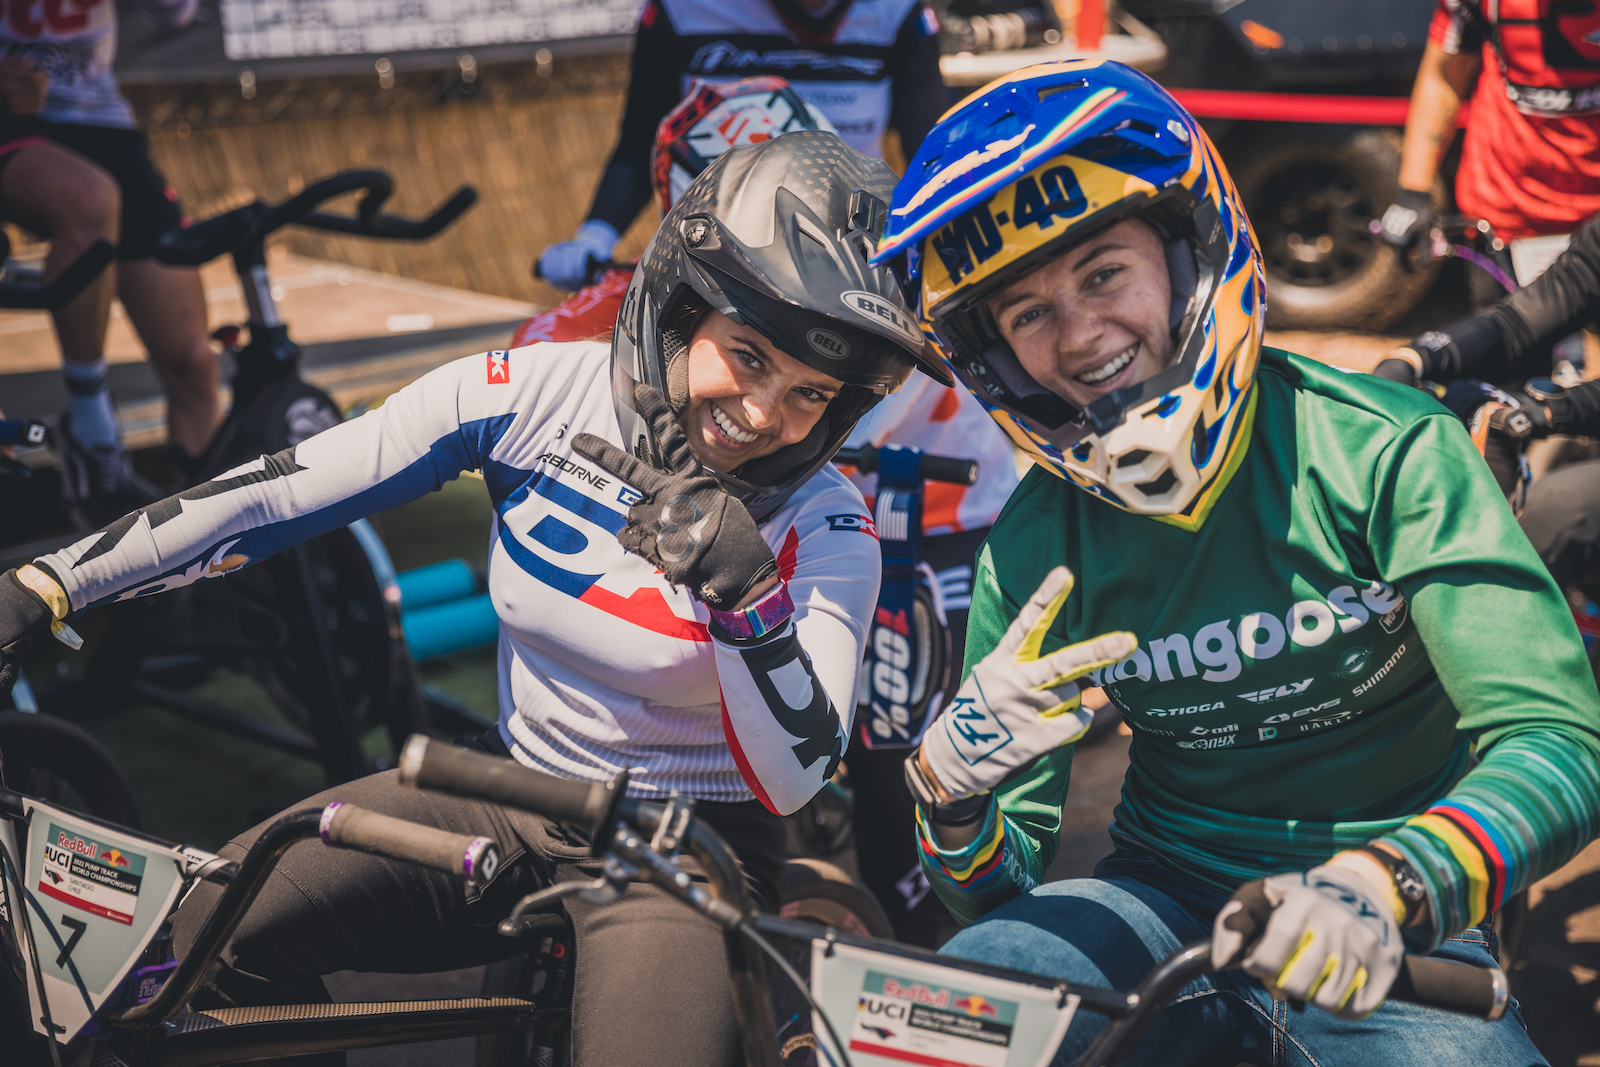 Payton Ridenour won the 2019 World Final in Bern Switzerland and claimed the rainbow stripes. Payton and her good friend Carly Kane were among 10 Americans competing on the weekend.